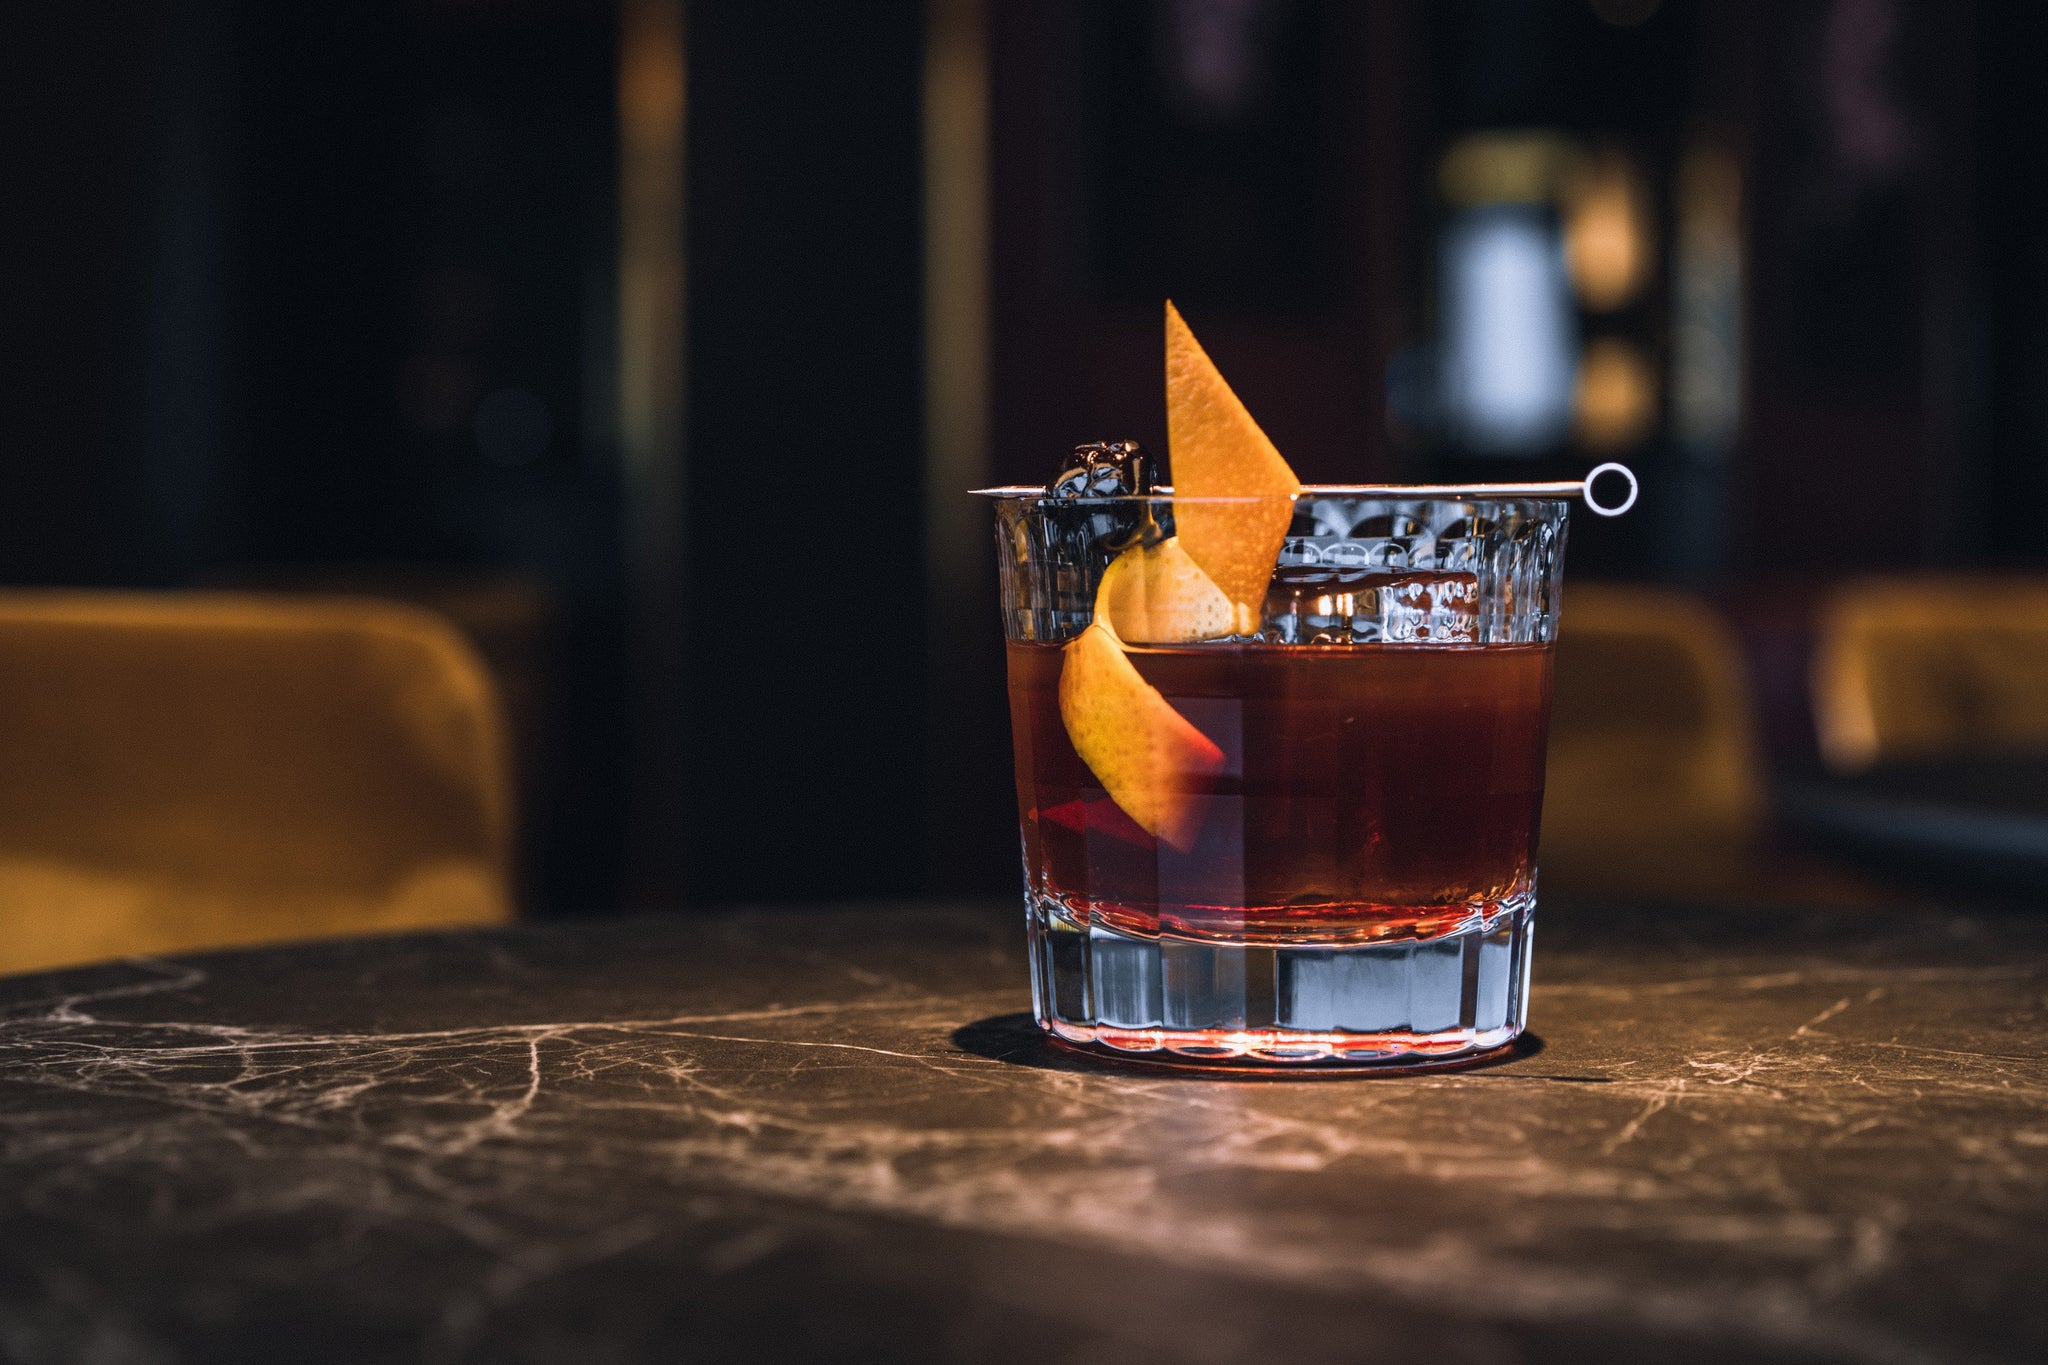 How To Make The Old Fashioned Cocktail